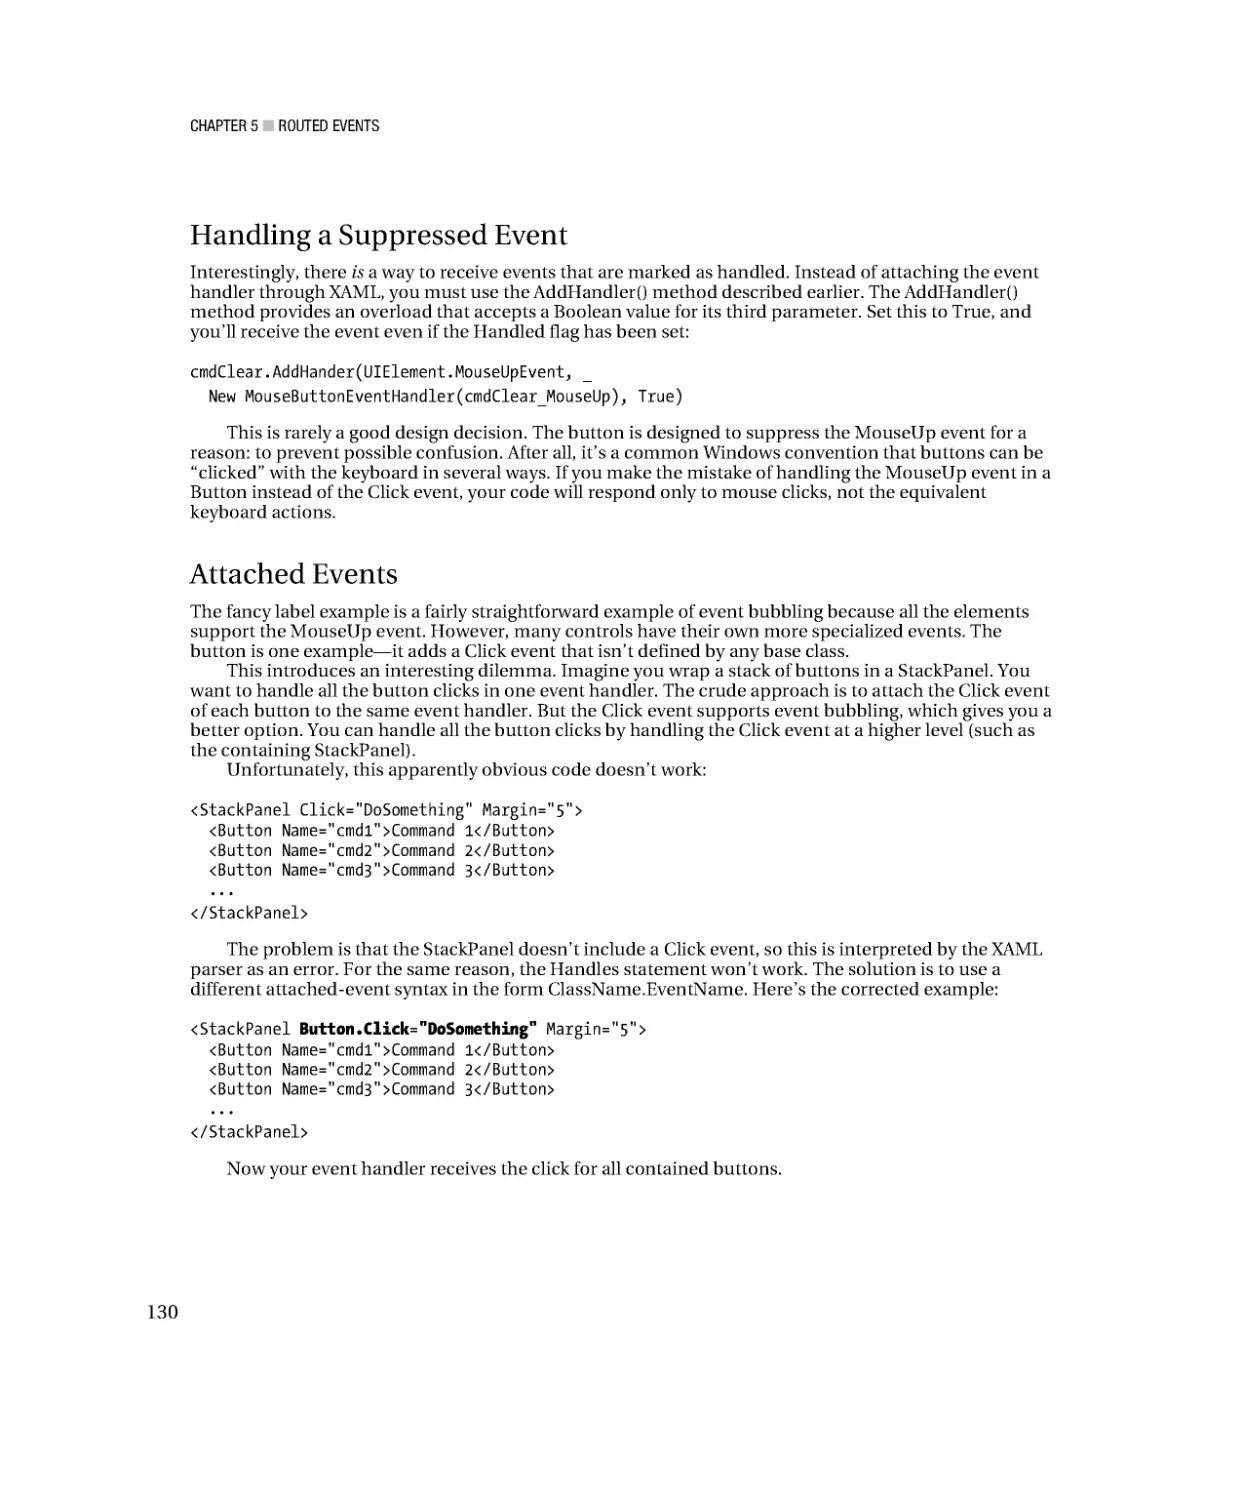 Handling a Suppressed Event
Attached Events